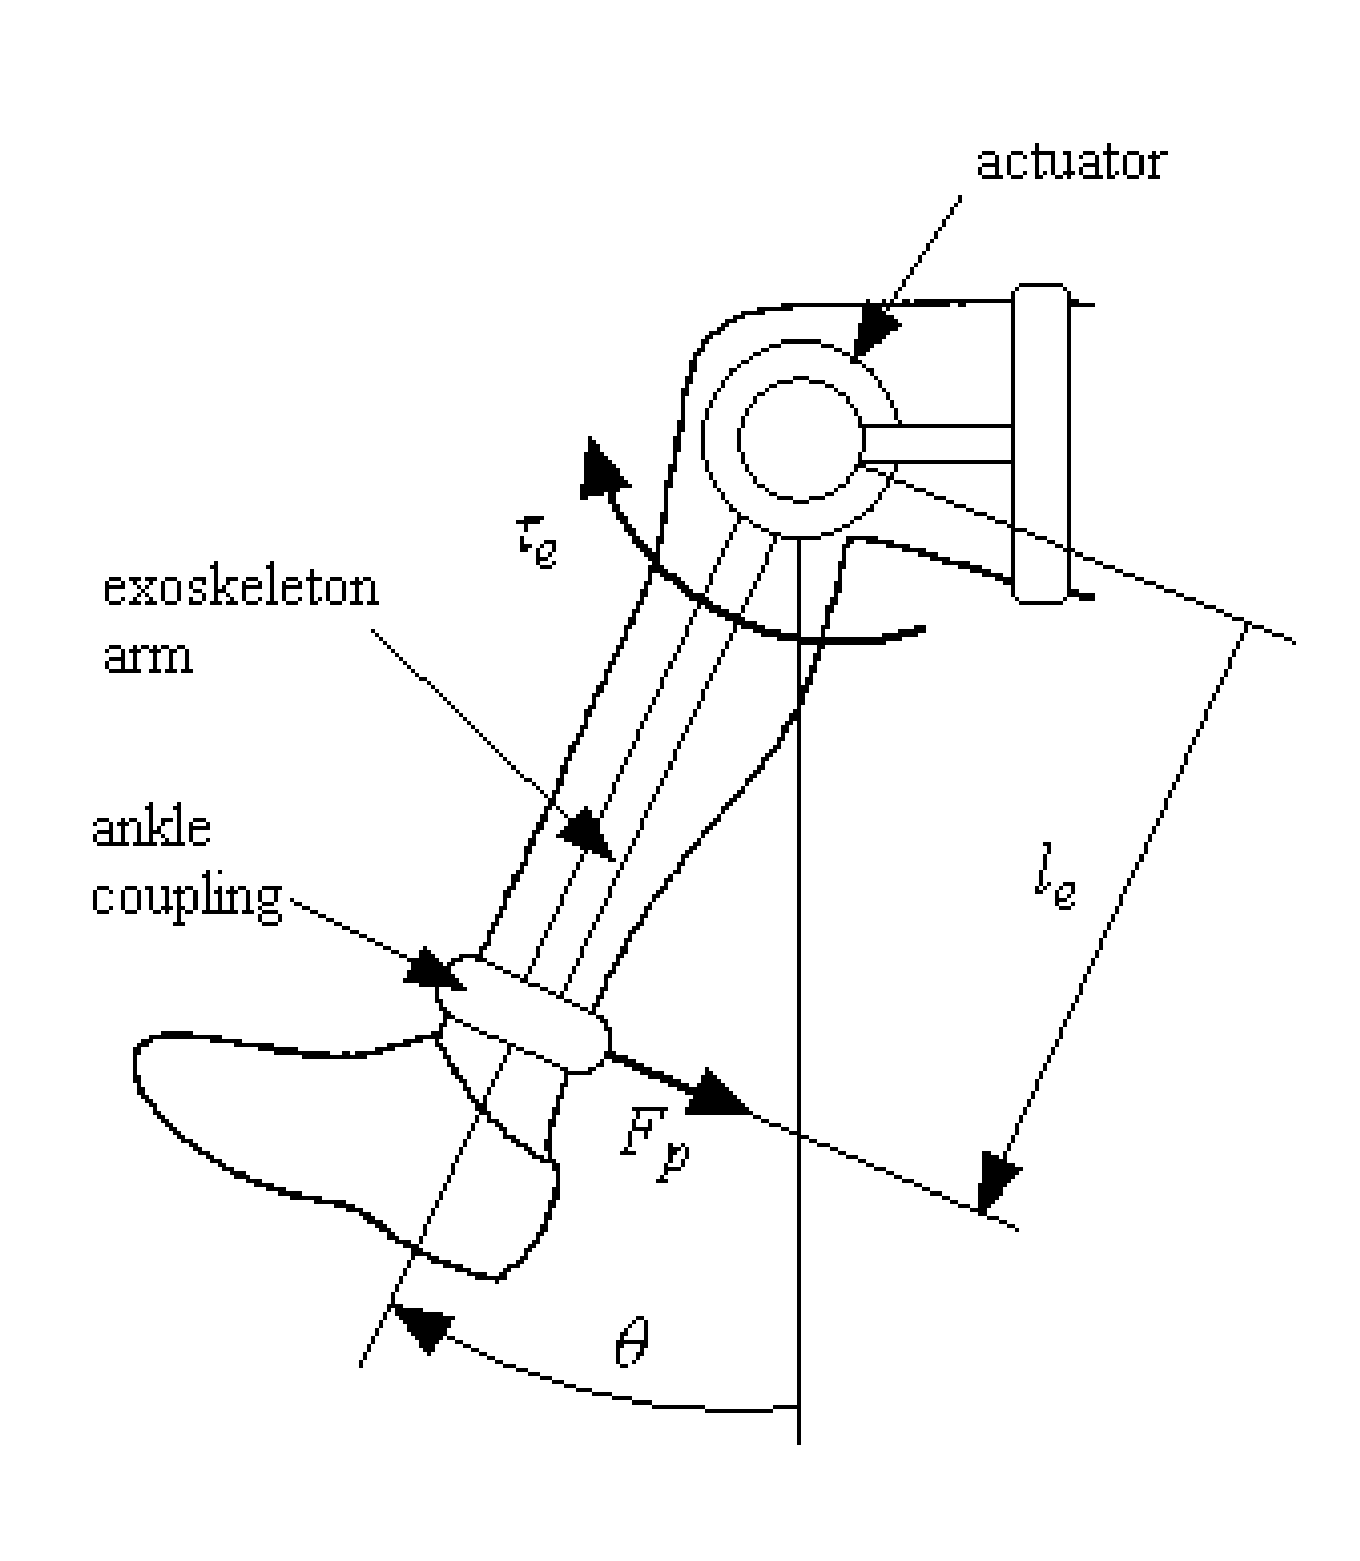 Controller for an assistive exoskeleton based on active impedance